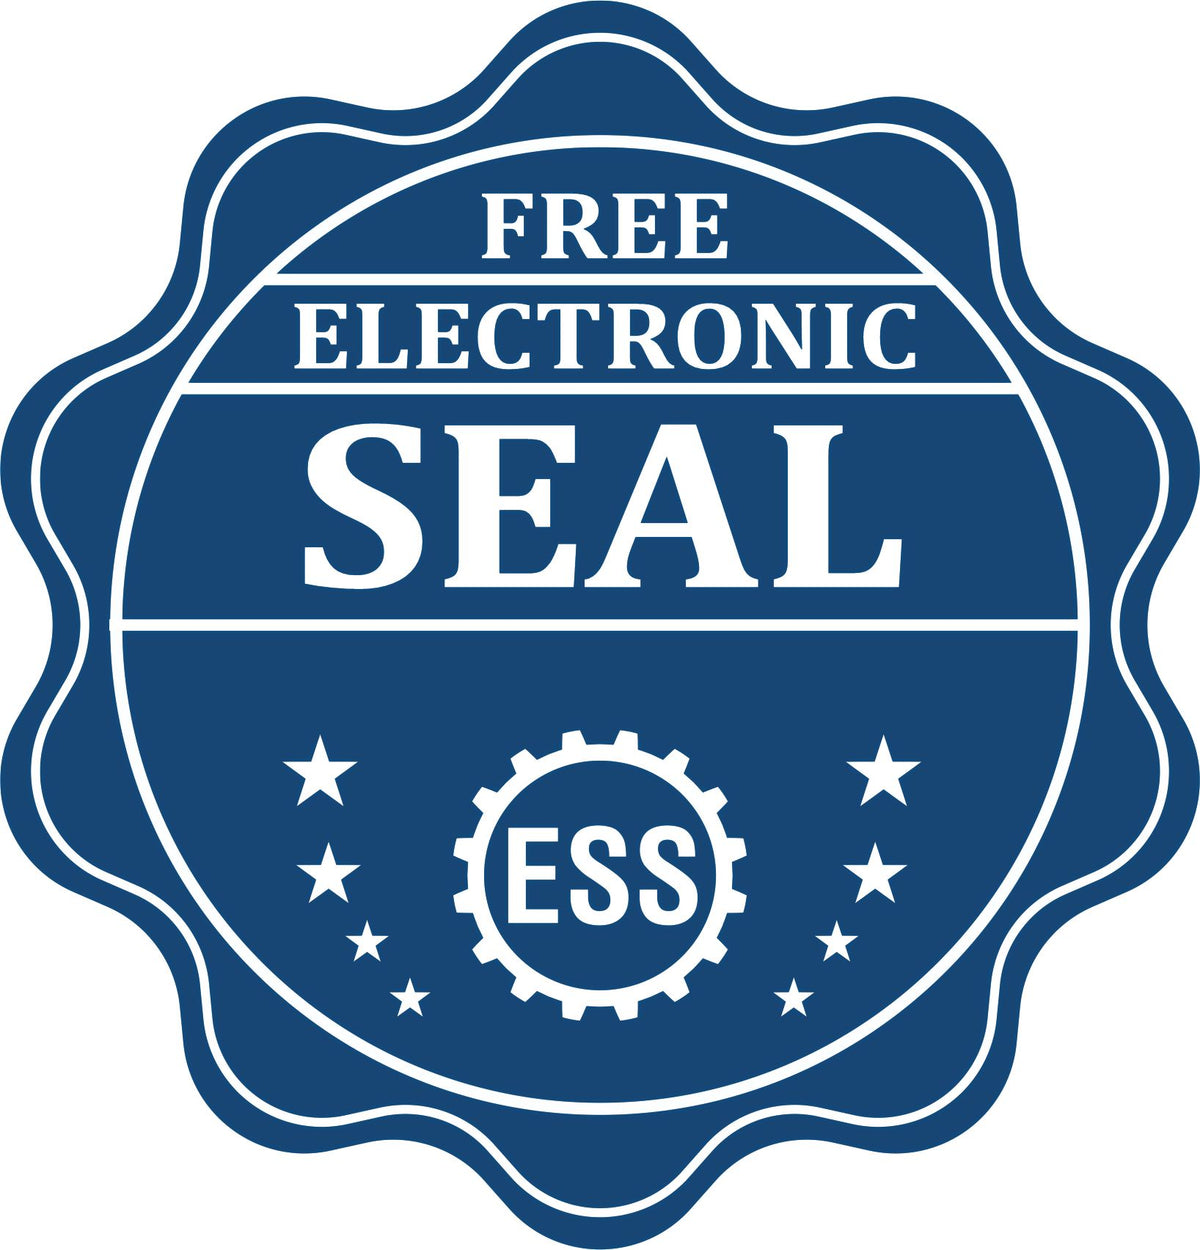 A badge showing a free electronic seal for the Soft Pocket Montana Landscape Architect Embosser with stars and the ESS gear on the emblem.